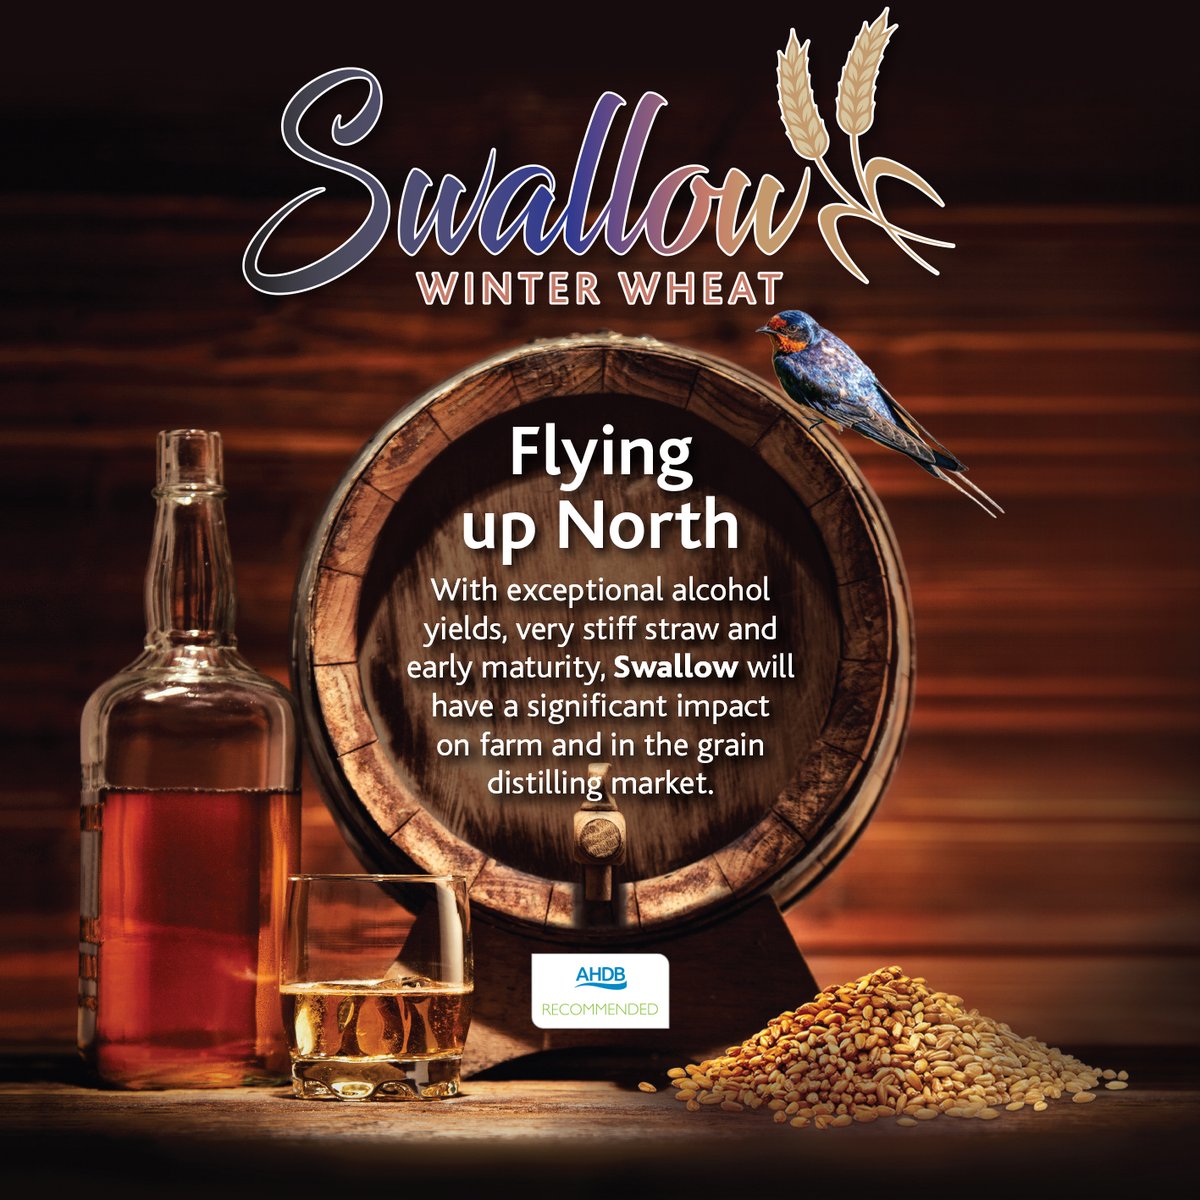 #Swallowwheat is loved by distillers. With the stiffest straw of all RL wheats and early ripening, growers in the North should too #agriculture #wheat #softwheat #distilling